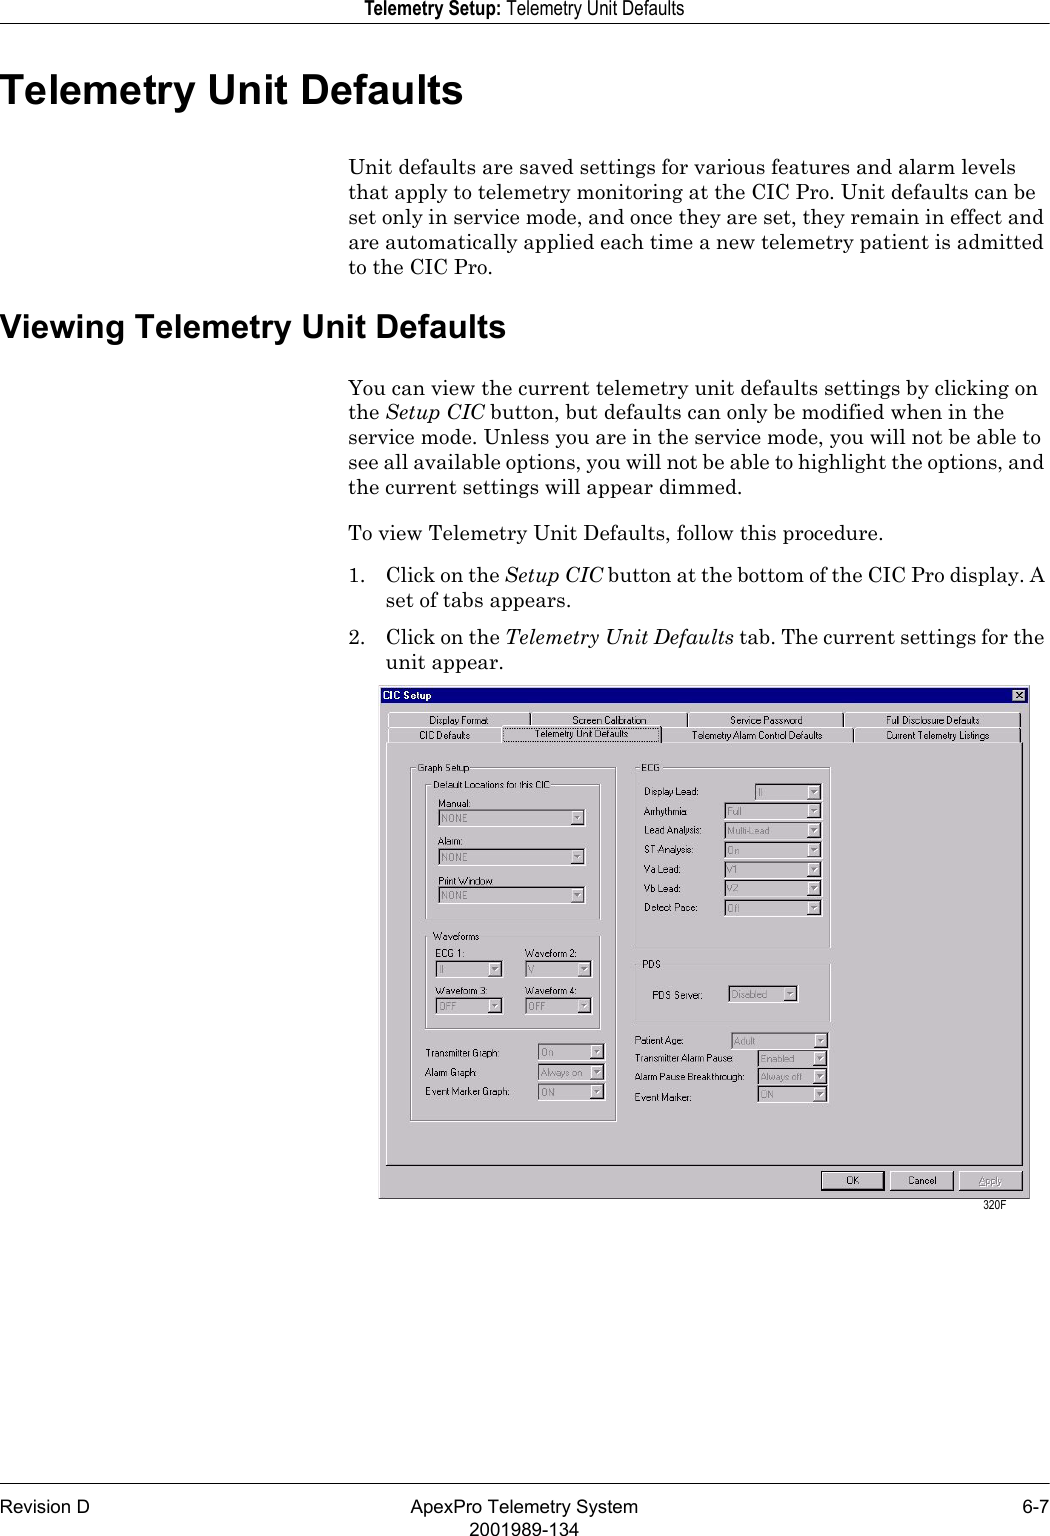 Revision D ApexPro Telemetry System 6-72001989-134Telemetry Setup: Telemetry Unit DefaultsTelemetry Unit DefaultsUnit defaults are saved settings for various features and alarm levels that apply to telemetry monitoring at the CIC Pro. Unit defaults can be set only in service mode, and once they are set, they remain in effect and are automatically applied each time a new telemetry patient is admitted to the CIC Pro.Viewing Telemetry Unit DefaultsYou can view the current telemetry unit defaults settings by clicking on the Setup CIC button, but defaults can only be modified when in the service mode. Unless you are in the service mode, you will not be able to see all available options, you will not be able to highlight the options, and the current settings will appear dimmed.To view Telemetry Unit Defaults, follow this procedure.1. Click on the Setup CIC button at the bottom of the CIC Pro display. A set of tabs appears.2. Click on the Telemetry Unit Defaults tab. The current settings for the unit appear. 320F